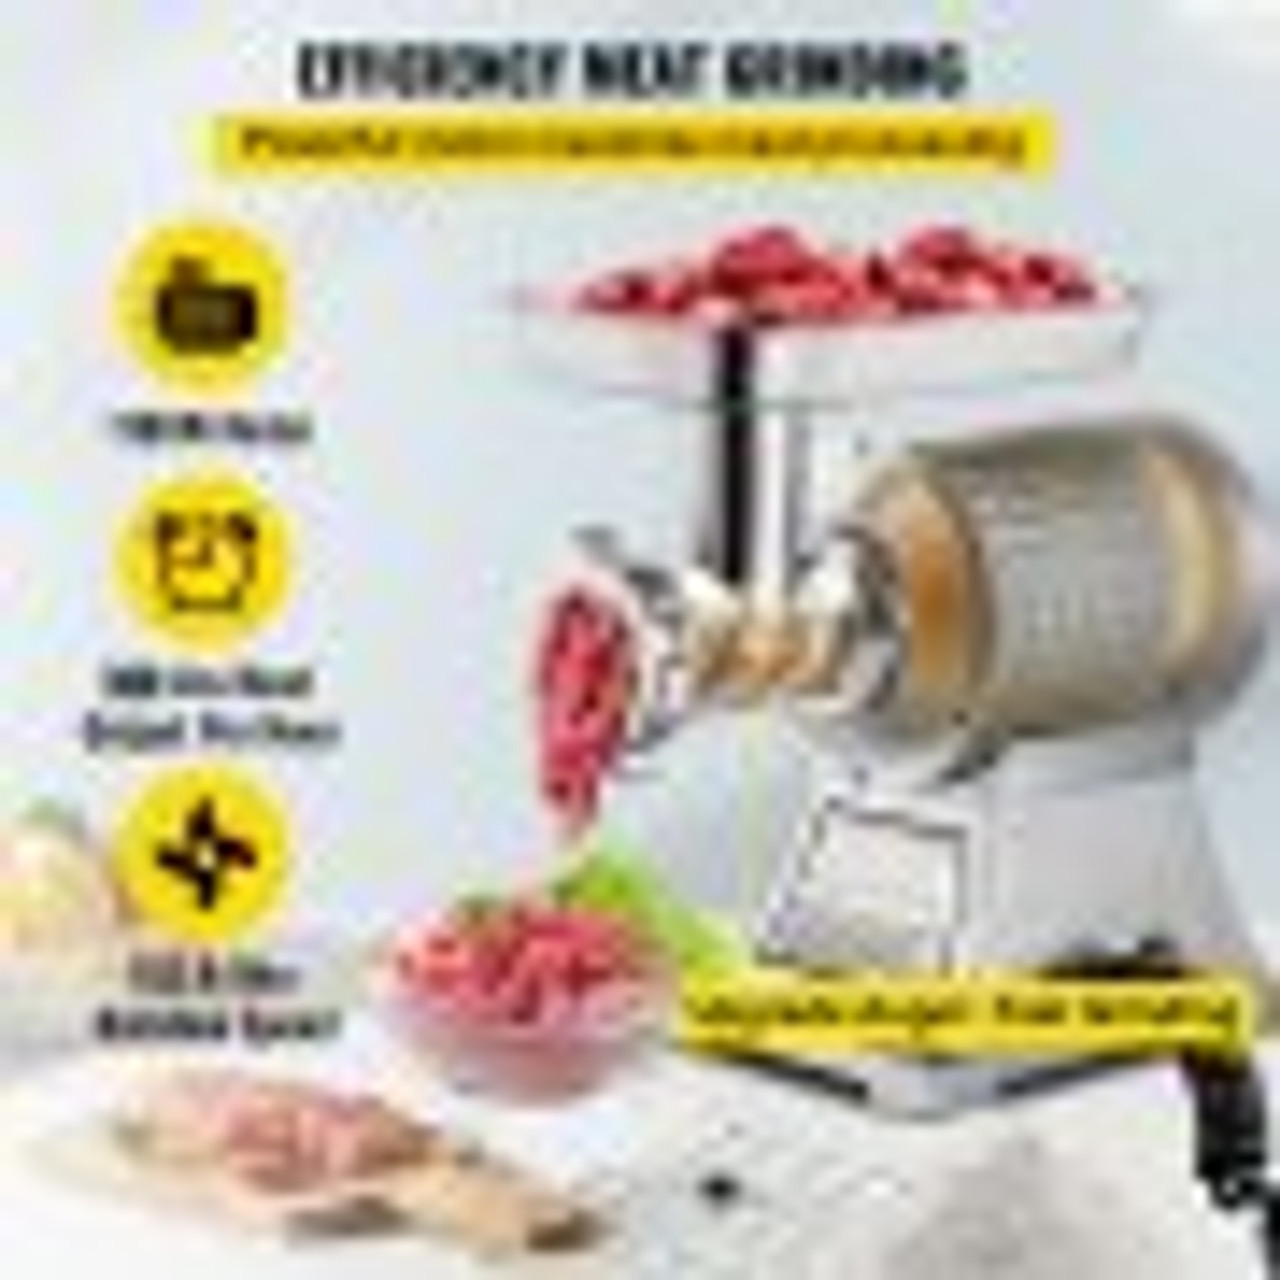 Electric Meat Grinder for Home Use, Stainless Steel Electric Meat Mincer  Machine with 4 Cutting Plates, Sausage Grinder Maker with Handle, Kitchen  Food Meat Grinder Heavy Duty 